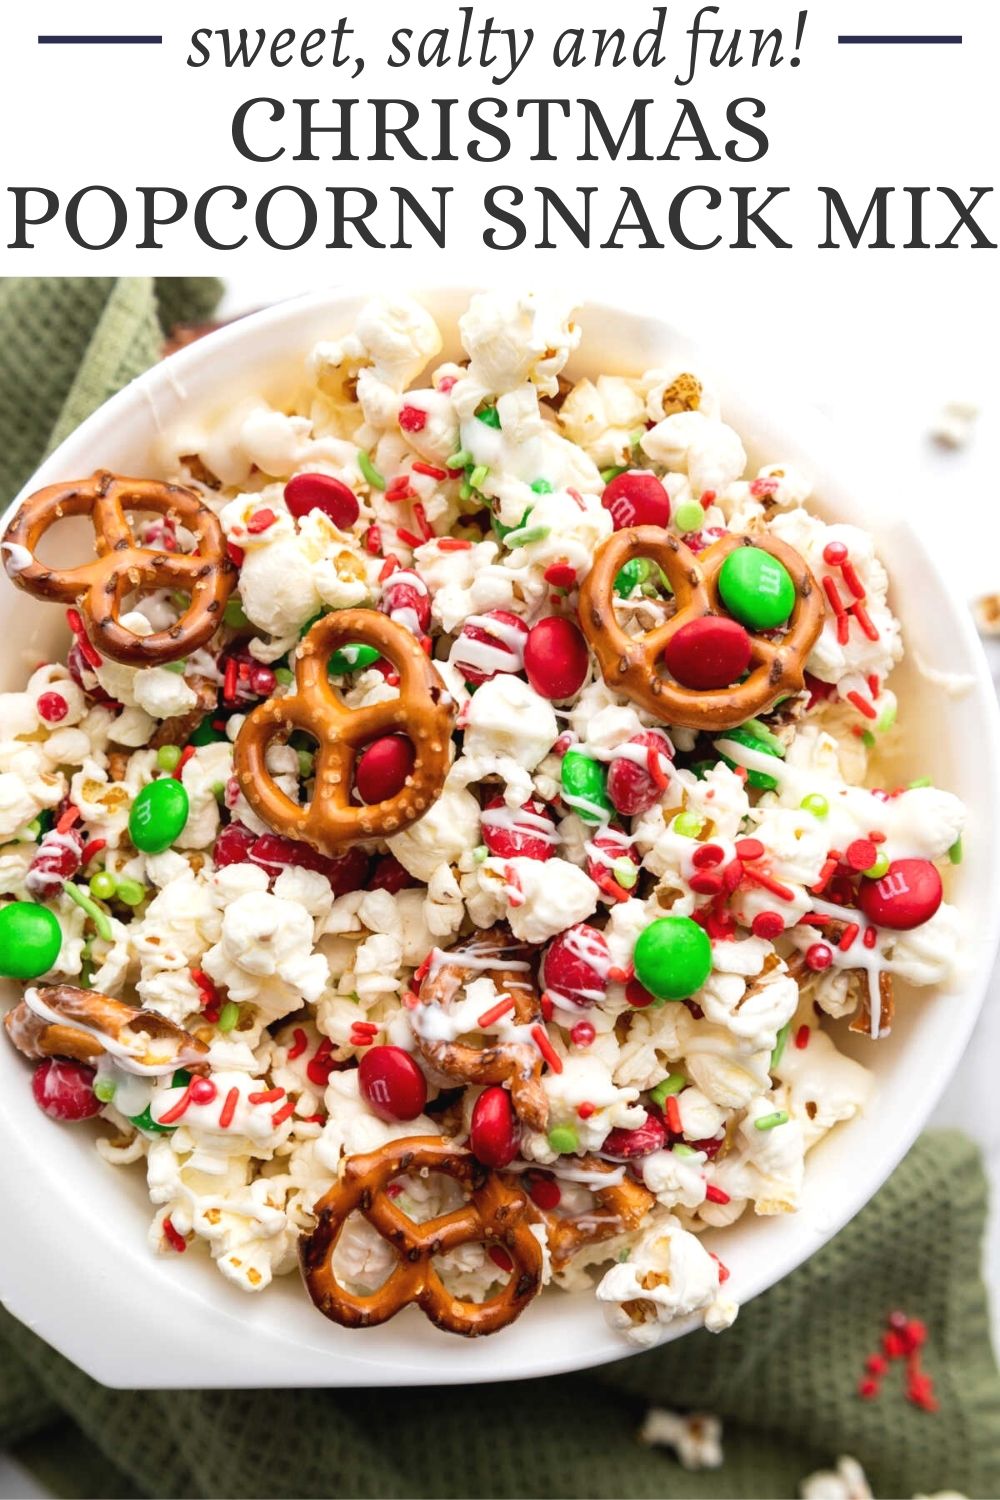 Christmas popcorn is the perfect sweet and salty snack mix for all of your holiday needs. It is perfect for movie night, parties and more.